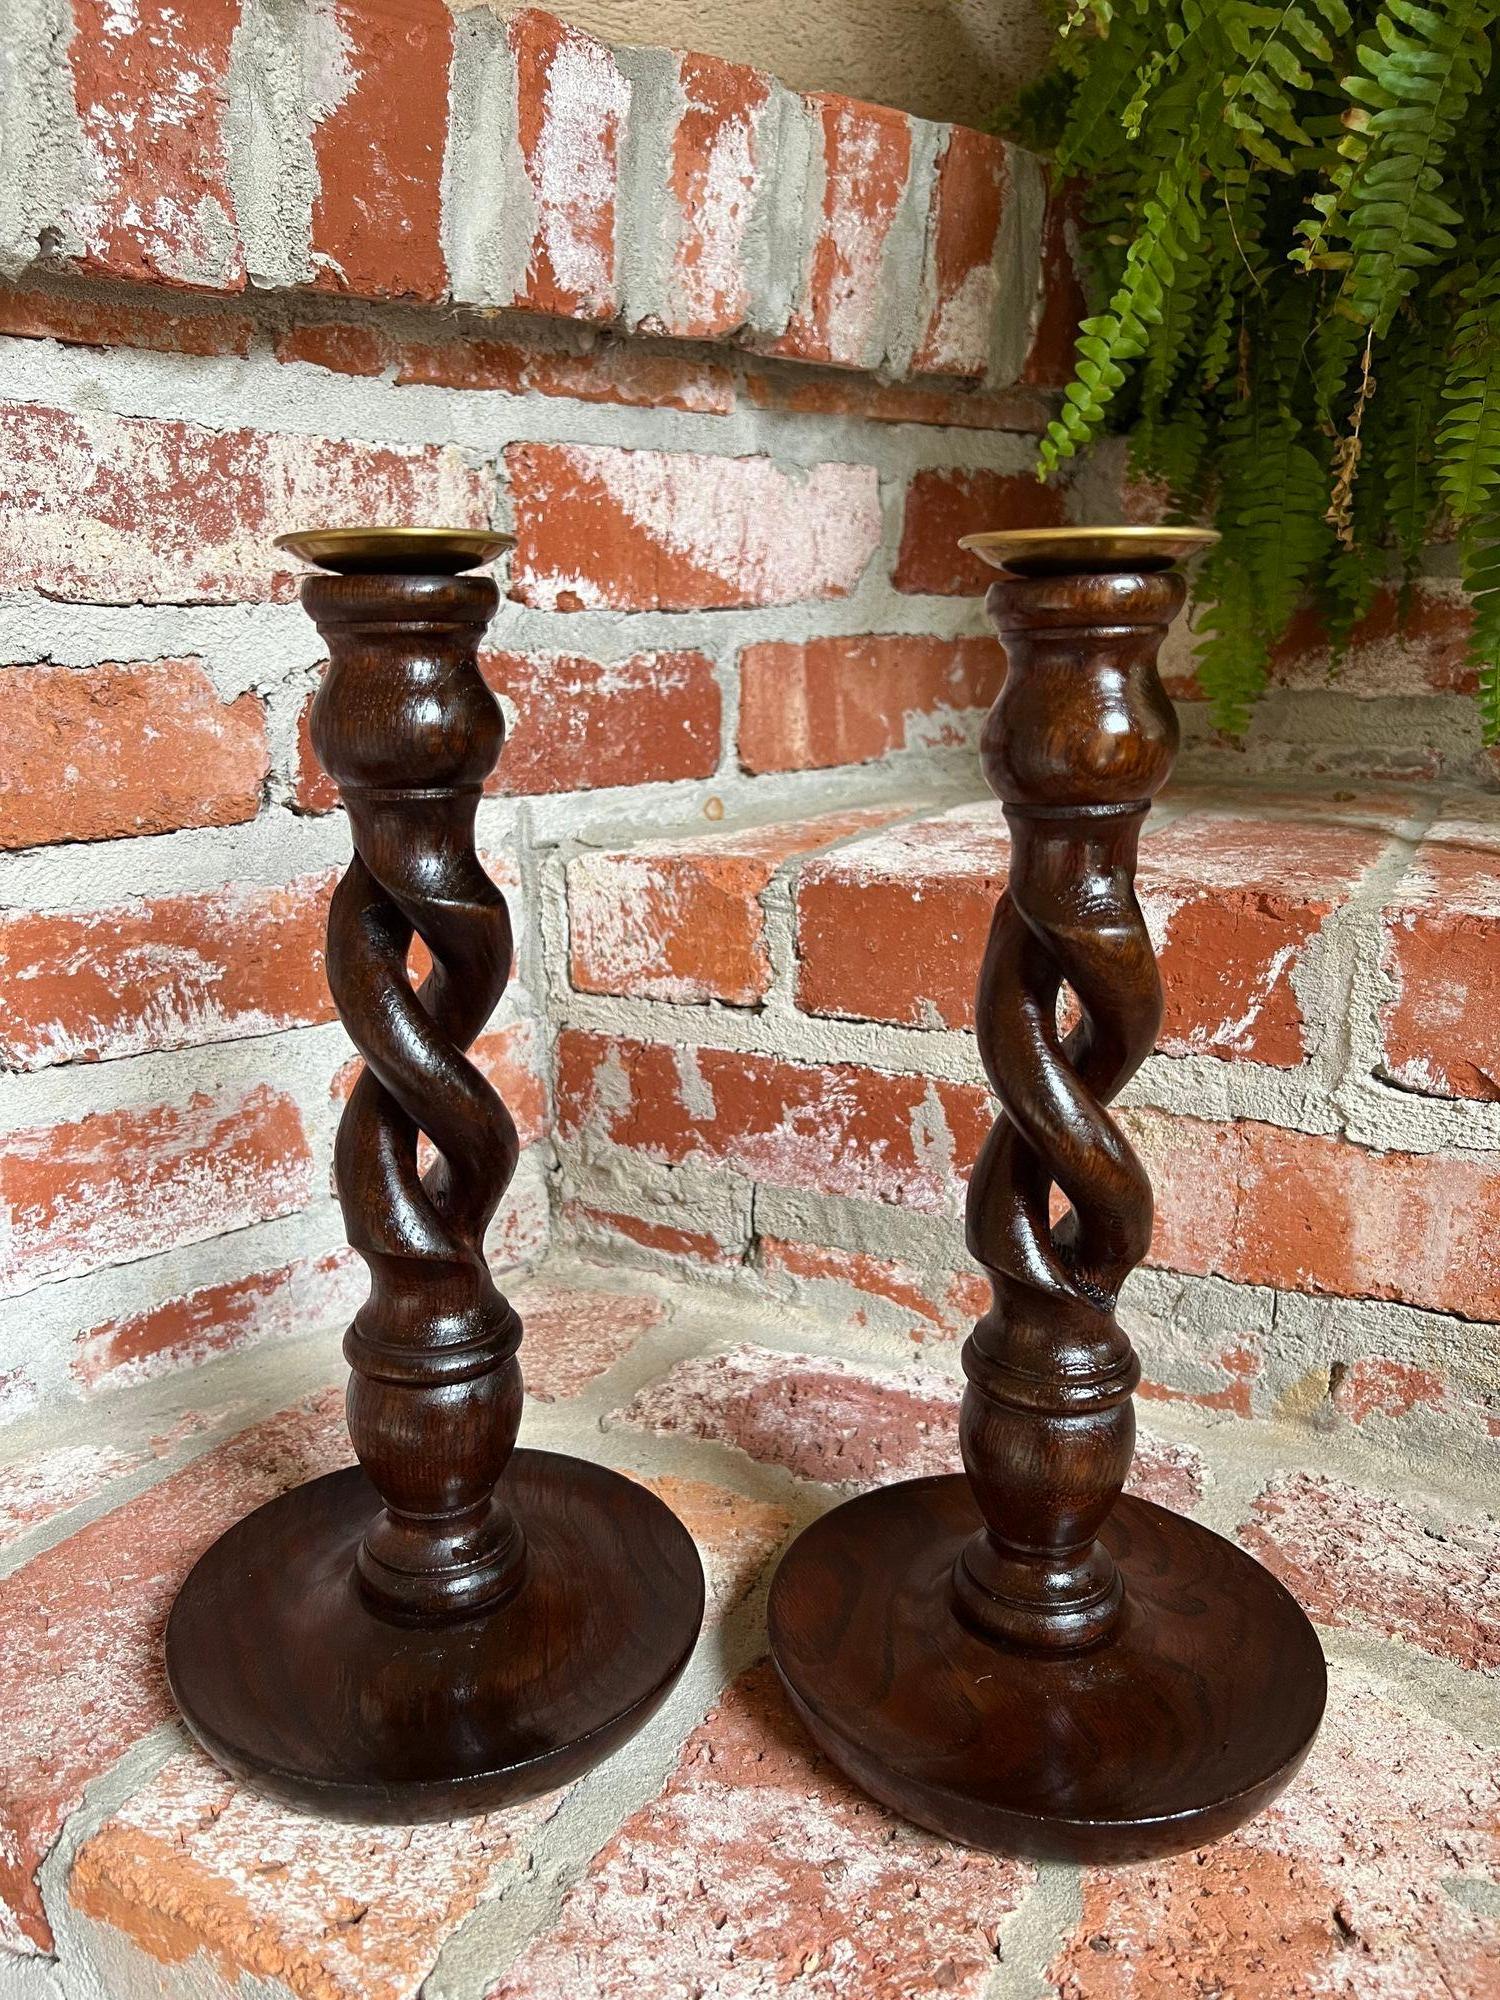 PAIR Set Antique English Oak OPEN Barley Twist Candlesticks Candle Holder Brass Bobeche.

Direct from England, a stunning pair of antique English oak barley twist candlesticks! These are the “open barley twist” design, highly sought after and hard